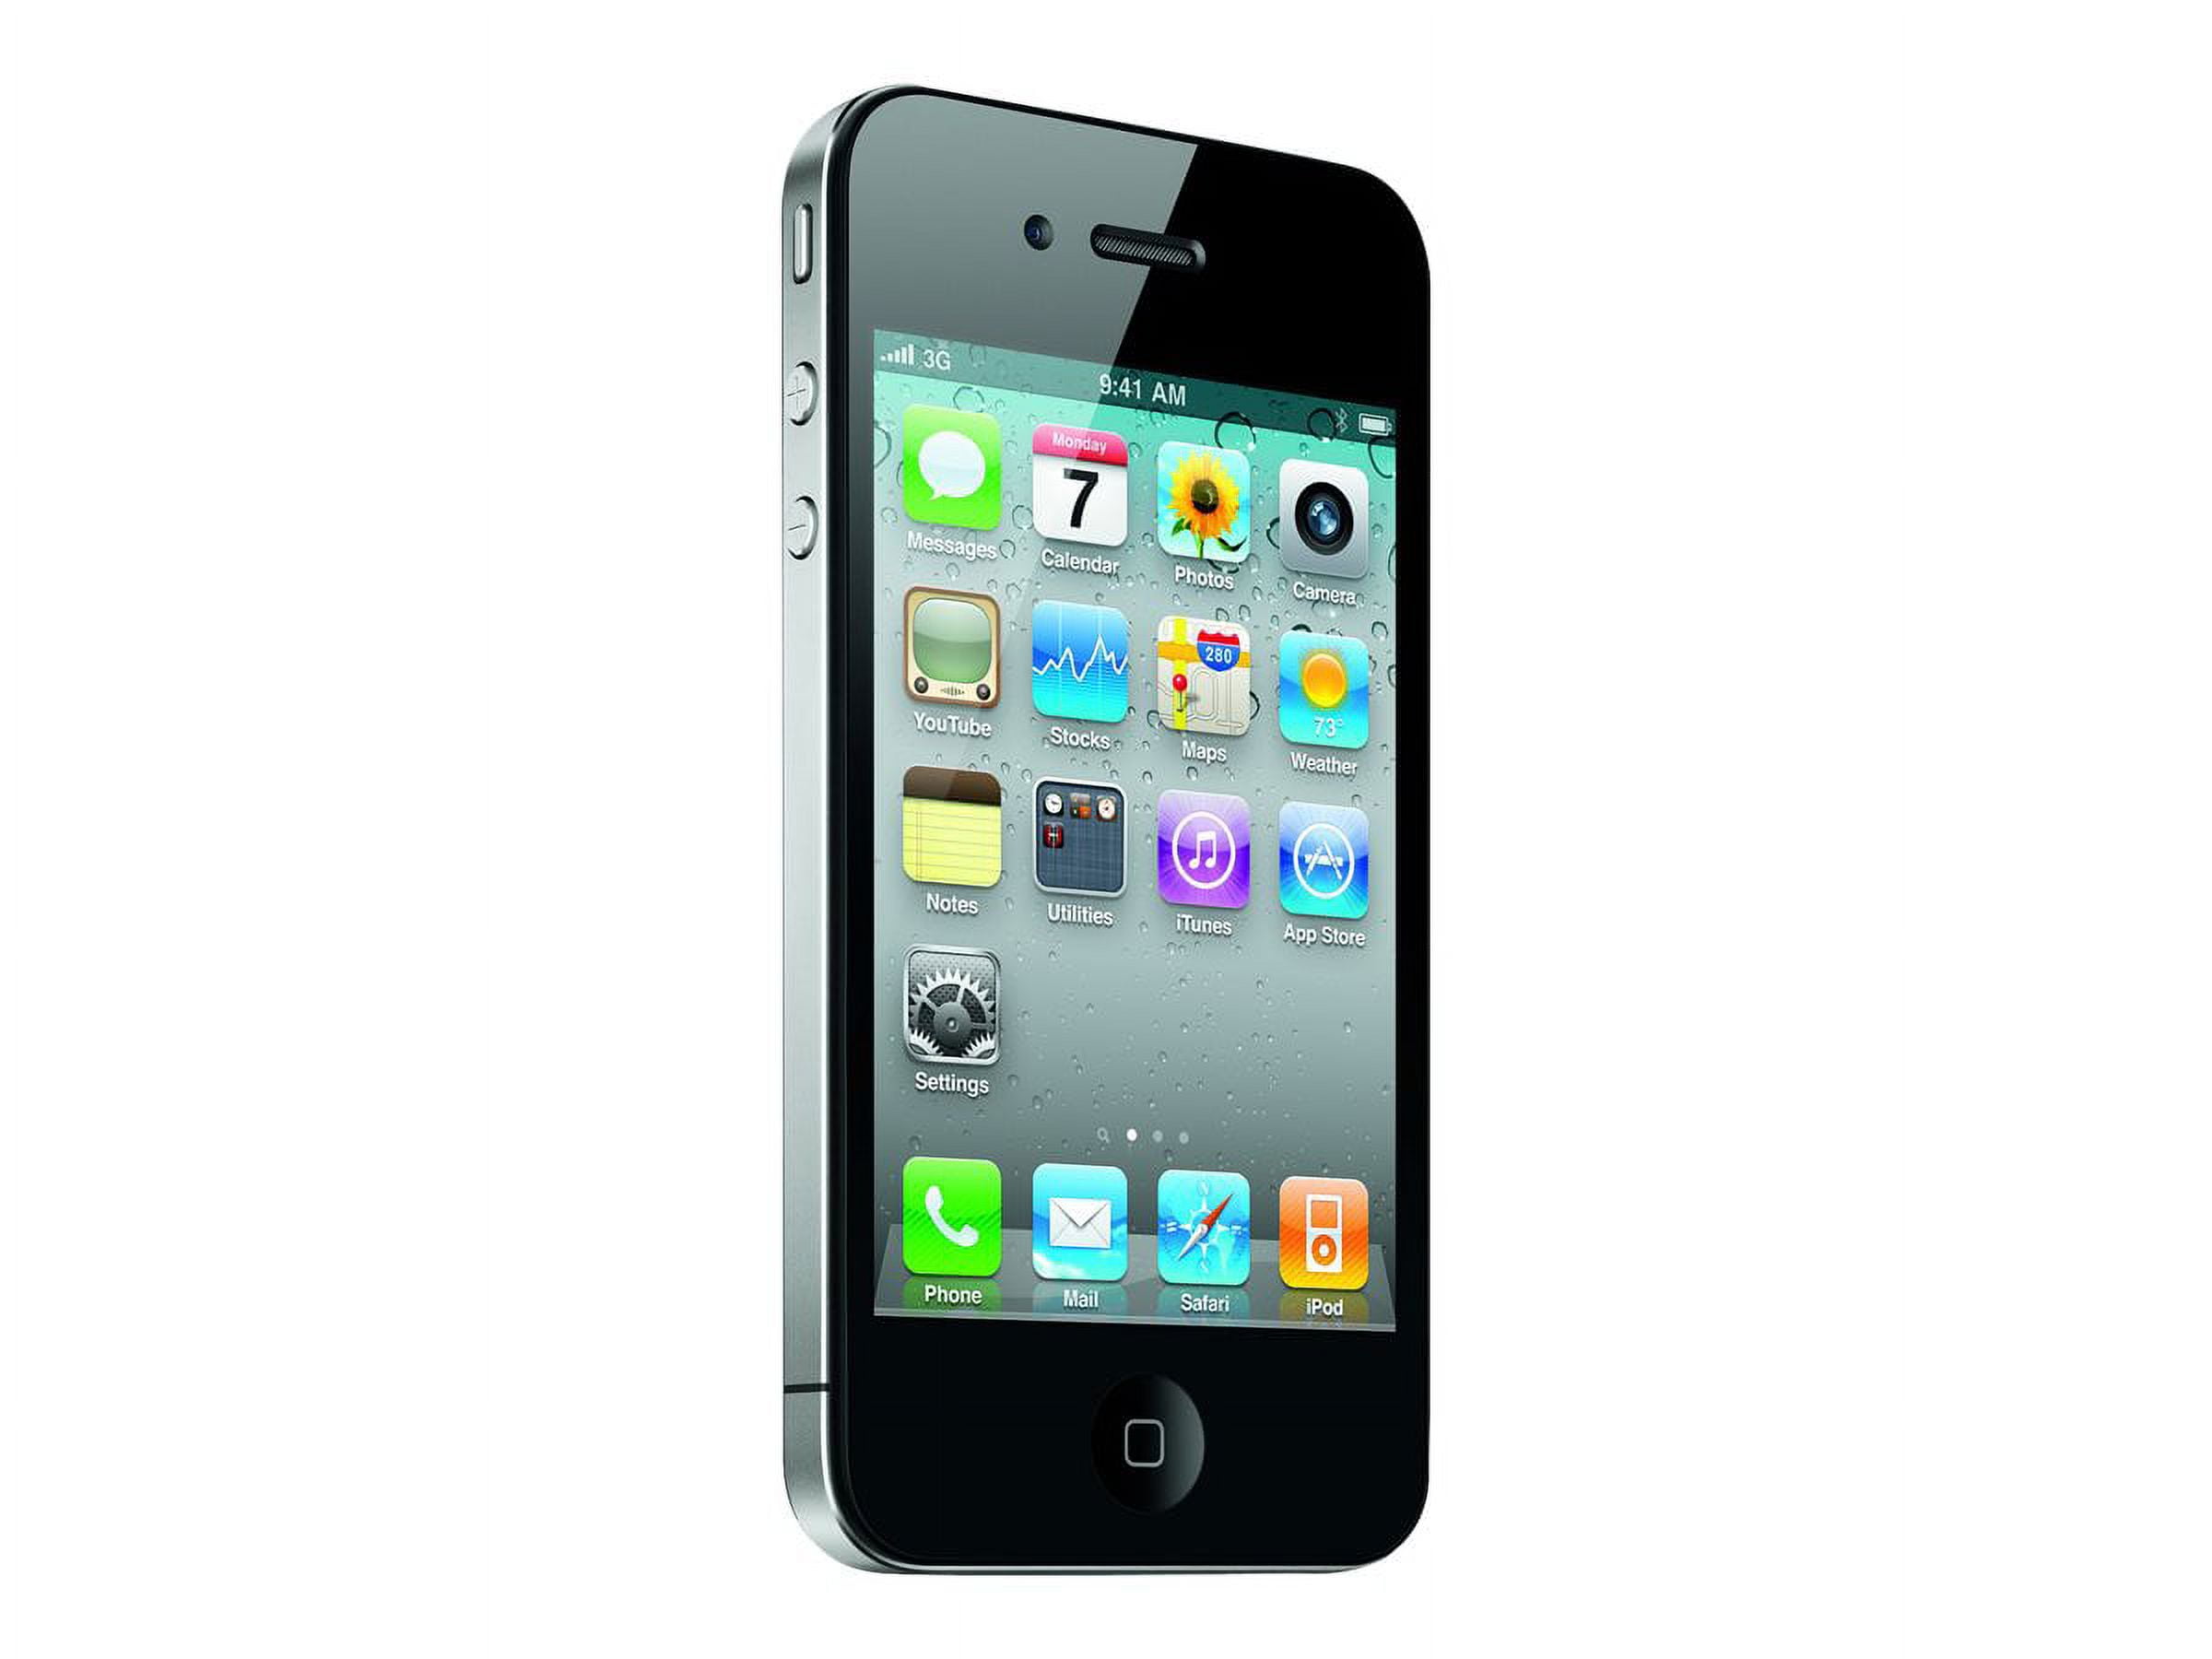 Apple iPhone 4 Smartphone Touch Display, 8-32GB Memory, iOS) Black, Smartphones & mobile phones, Official archives of Merkandi